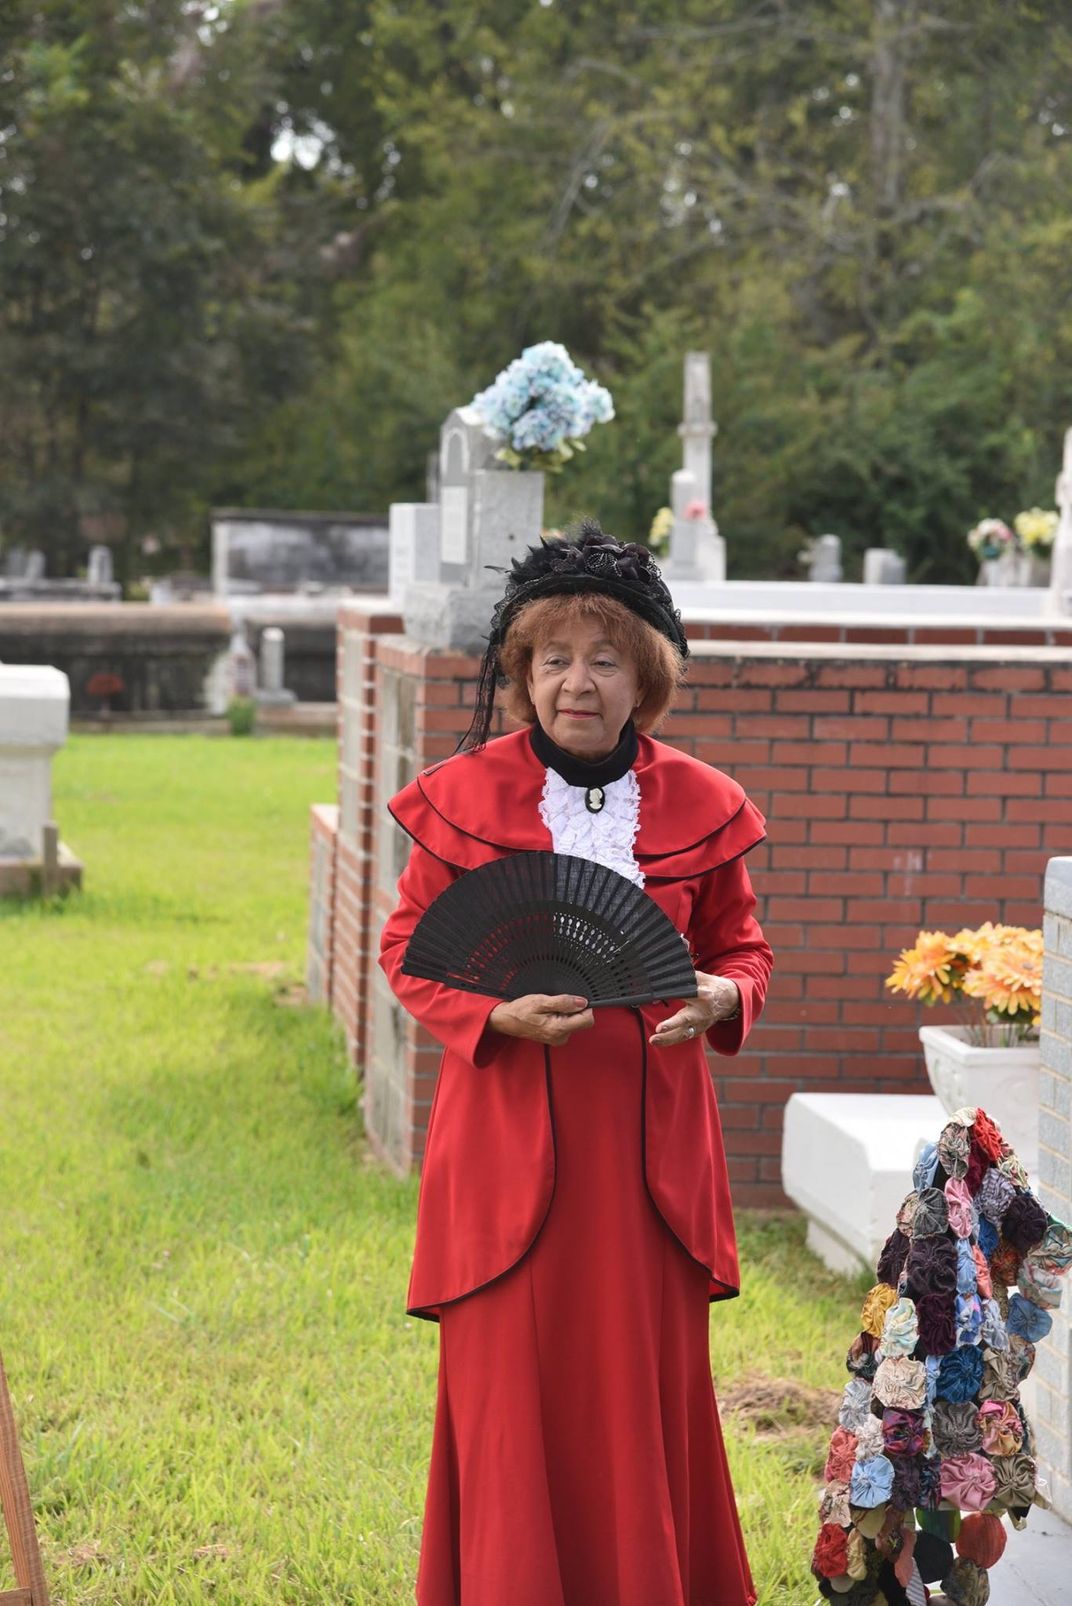 In Cemeteries Across the Country, Reenactors Are Resurrecting the Dead